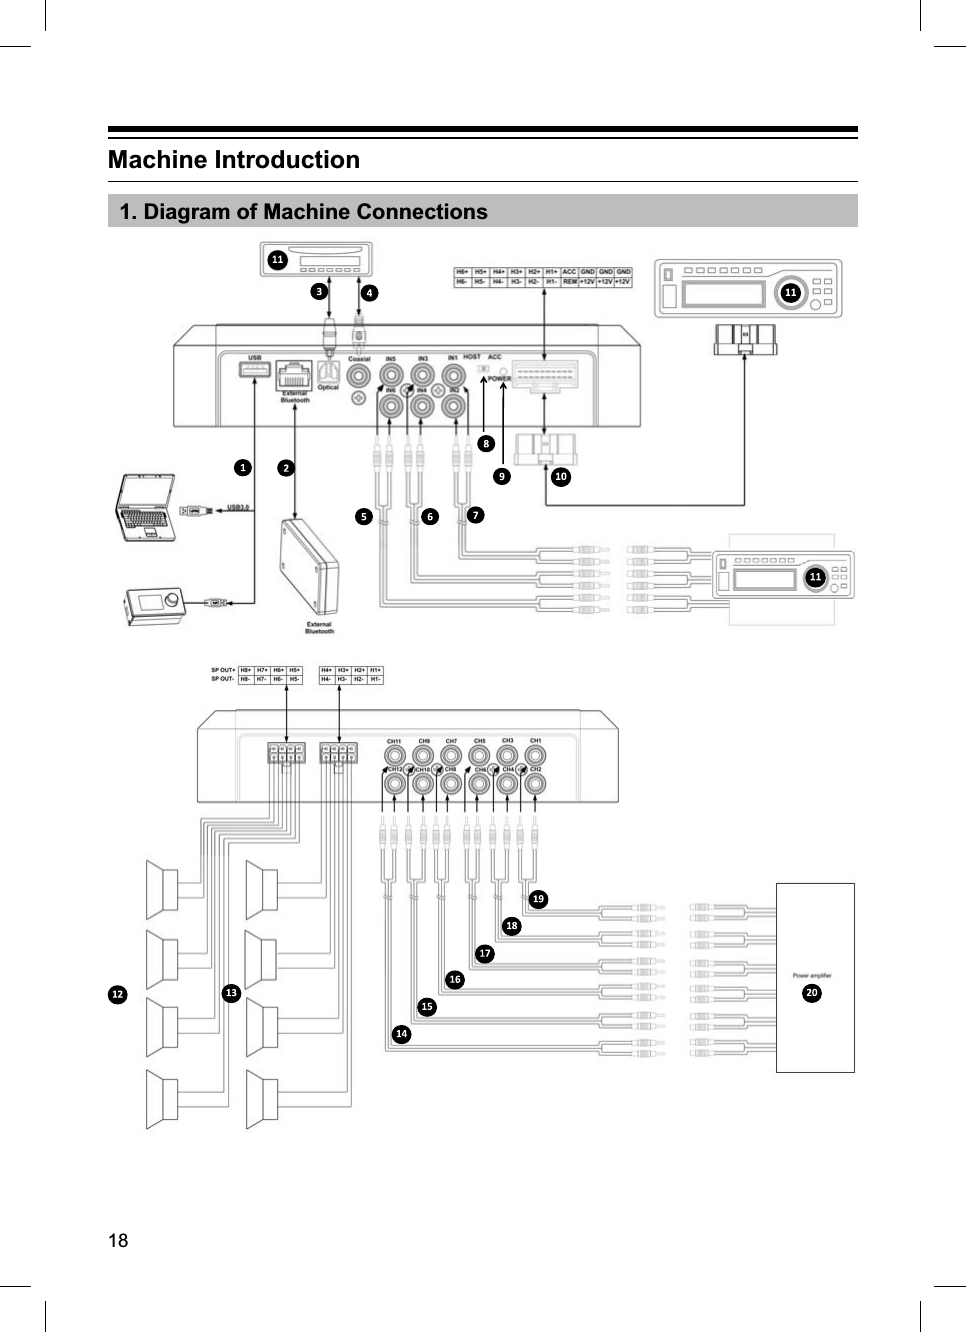 18Machine Introduction1. Diagram of Machine Connections